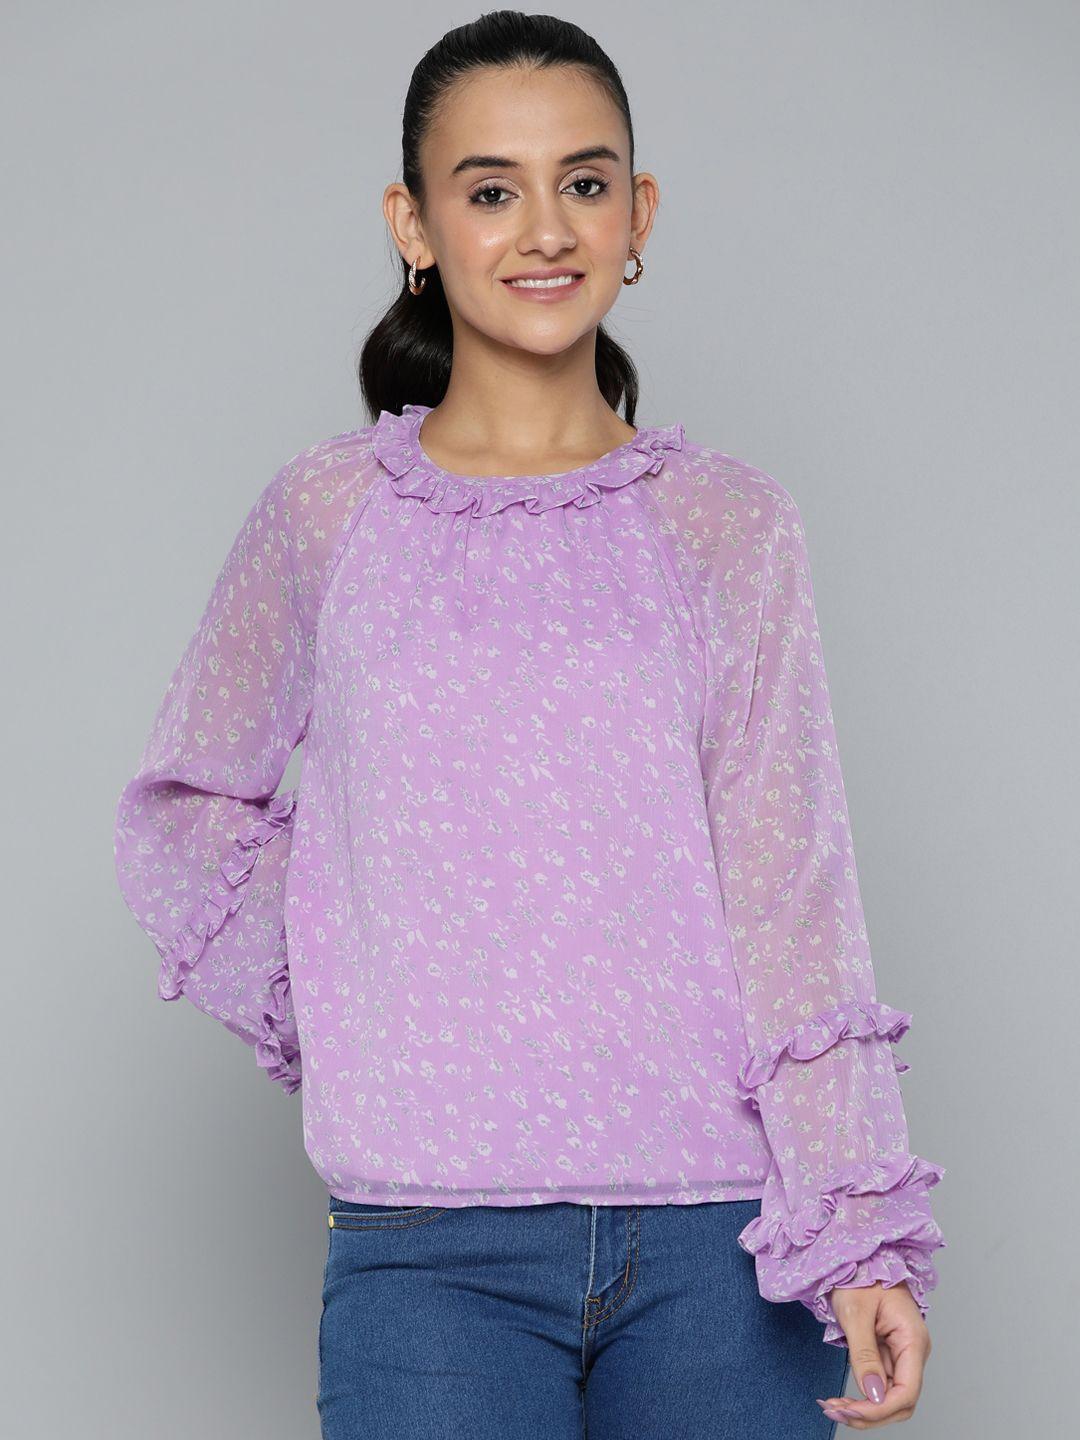 here&now dobby woven floral print top